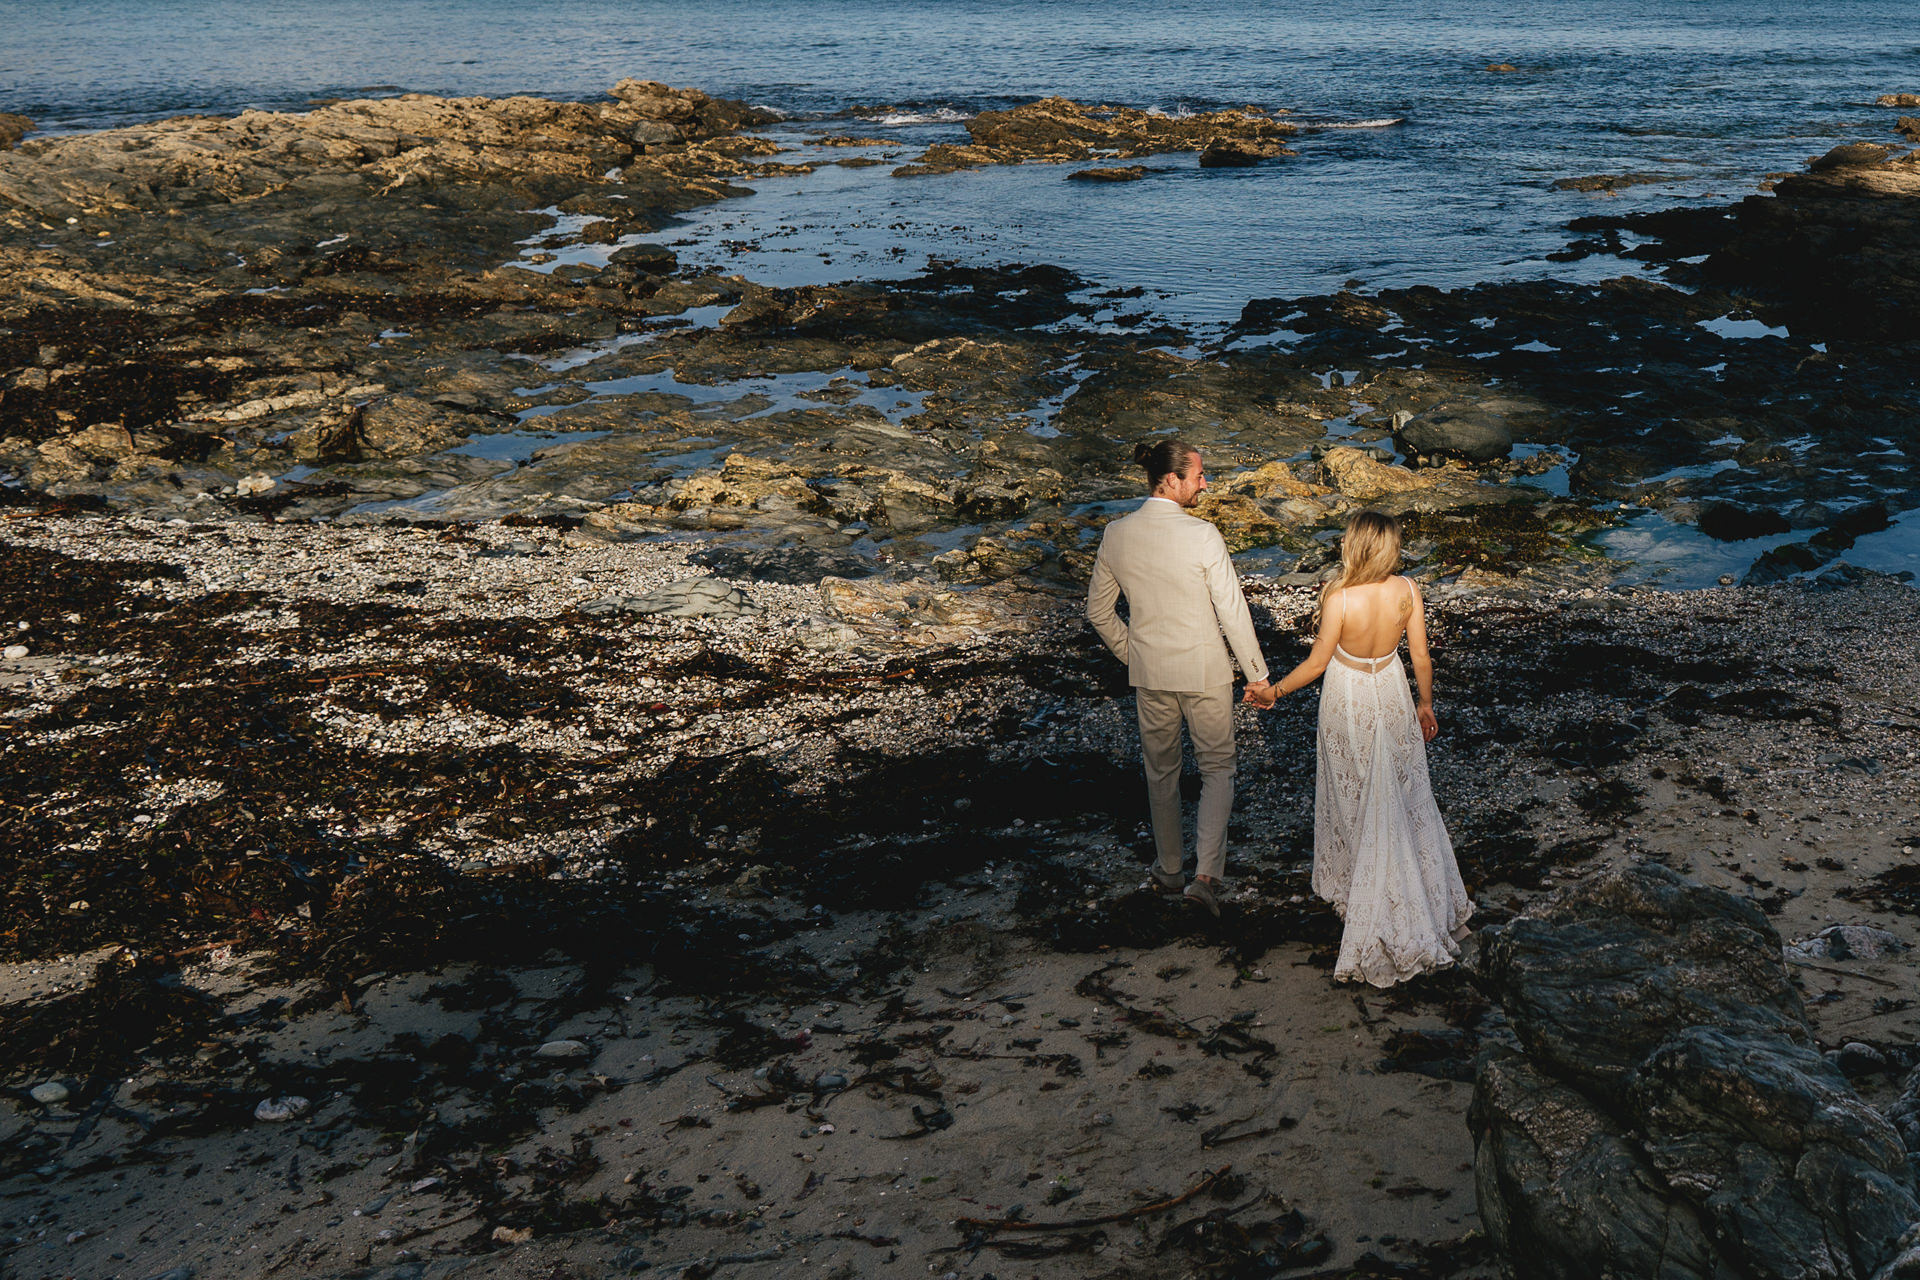 Bride and groom walking hand in hand across a rocky beach